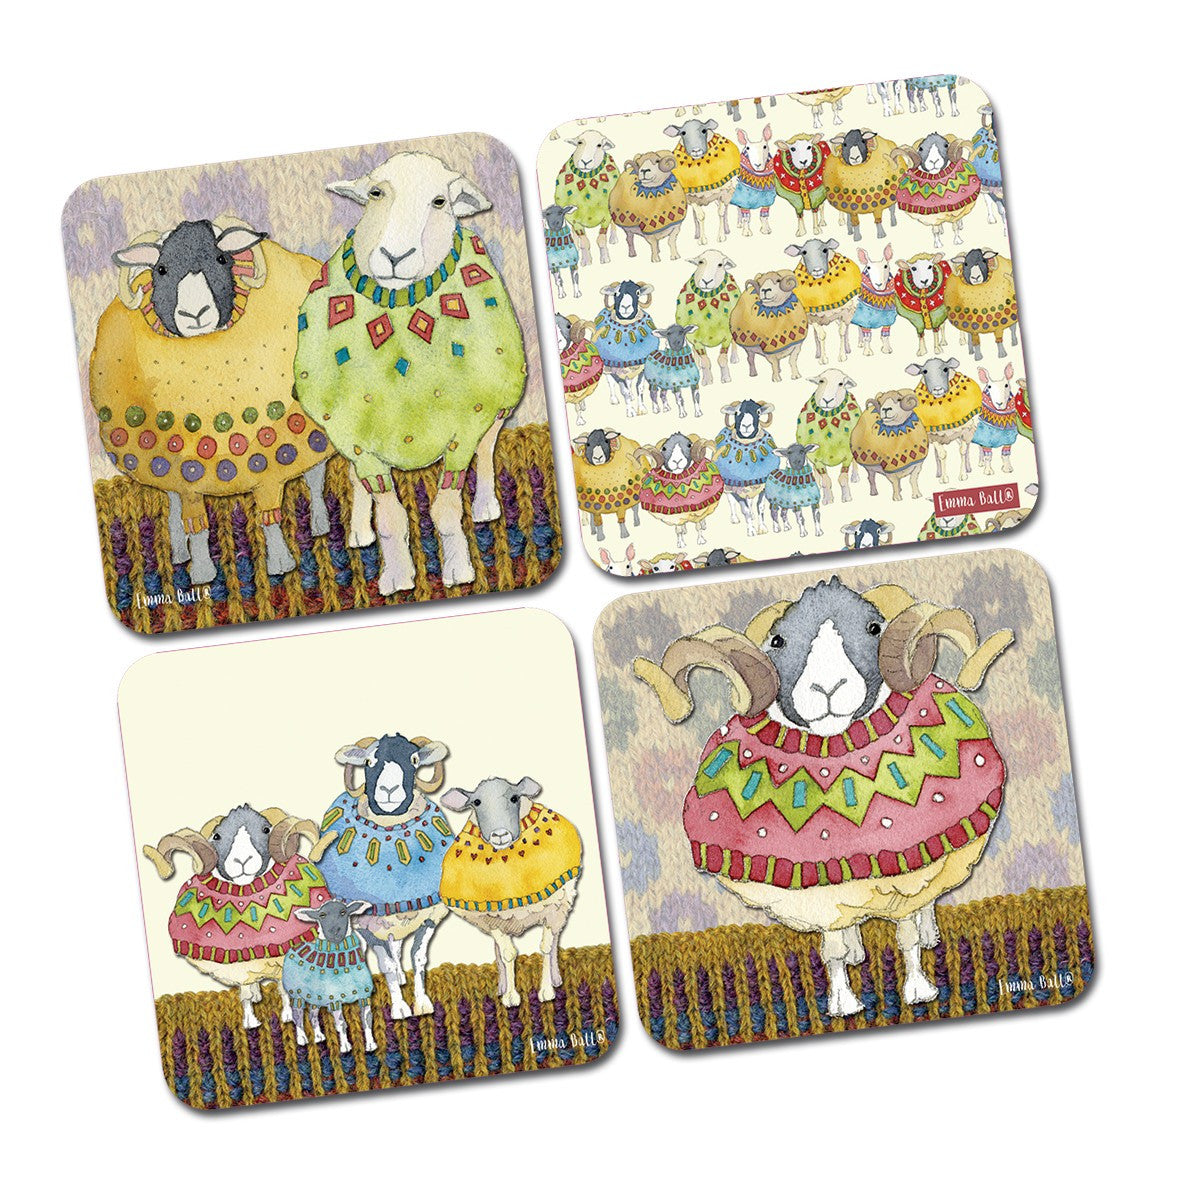 Sheep in Sweaters Coasters - Set of 4 from Emma Ball